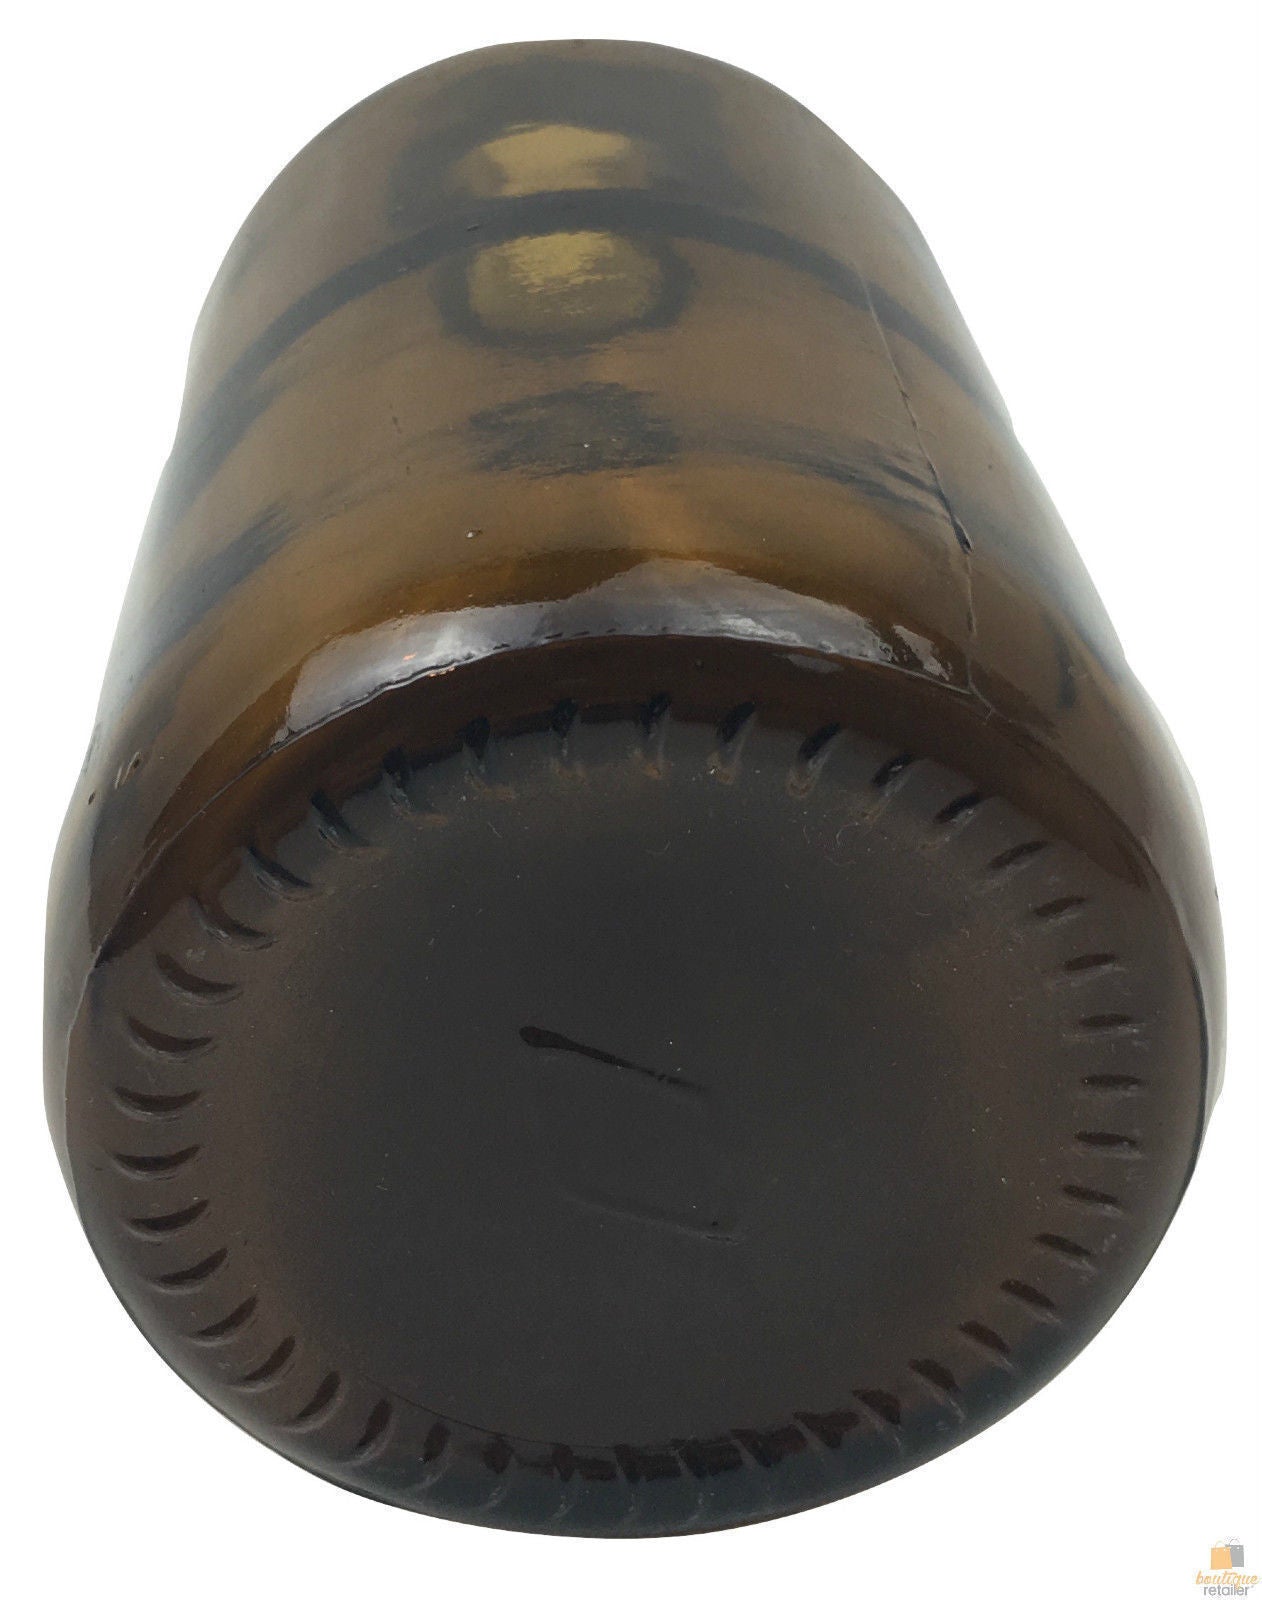 12x 600ml Brown Glass Bottle Plinking Shooting Target Practice without Lids/Caps